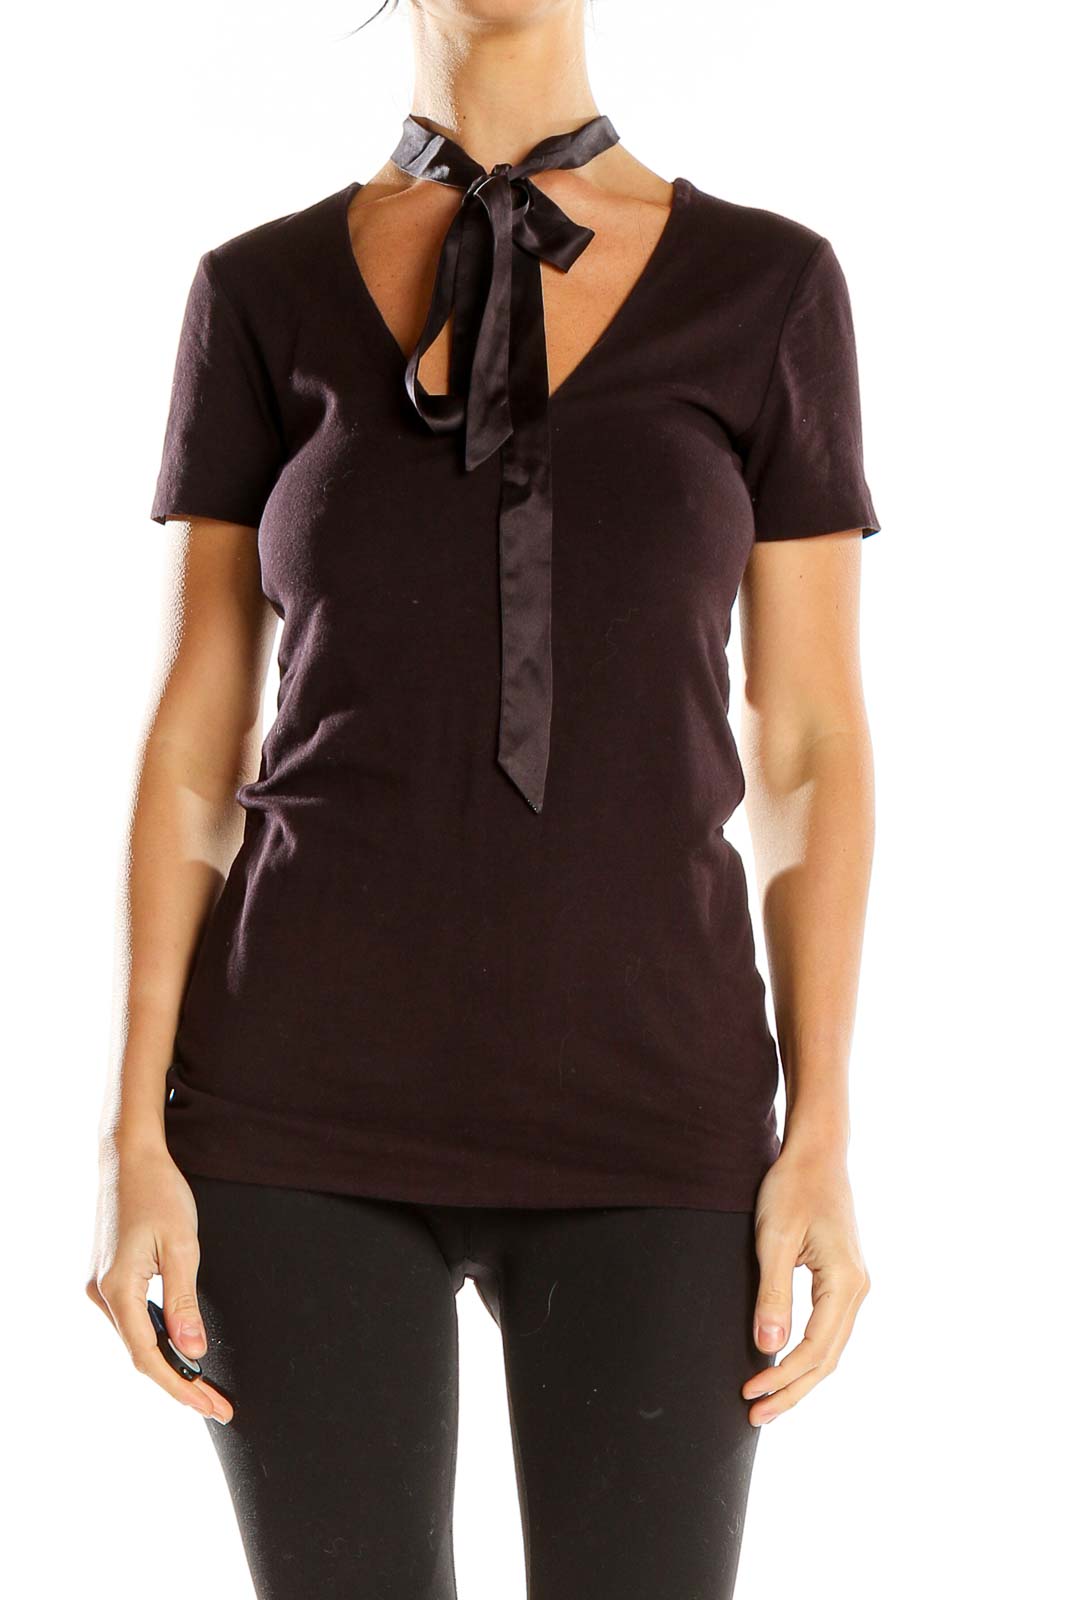 Brown T-Shirt With Neck Scarf Front